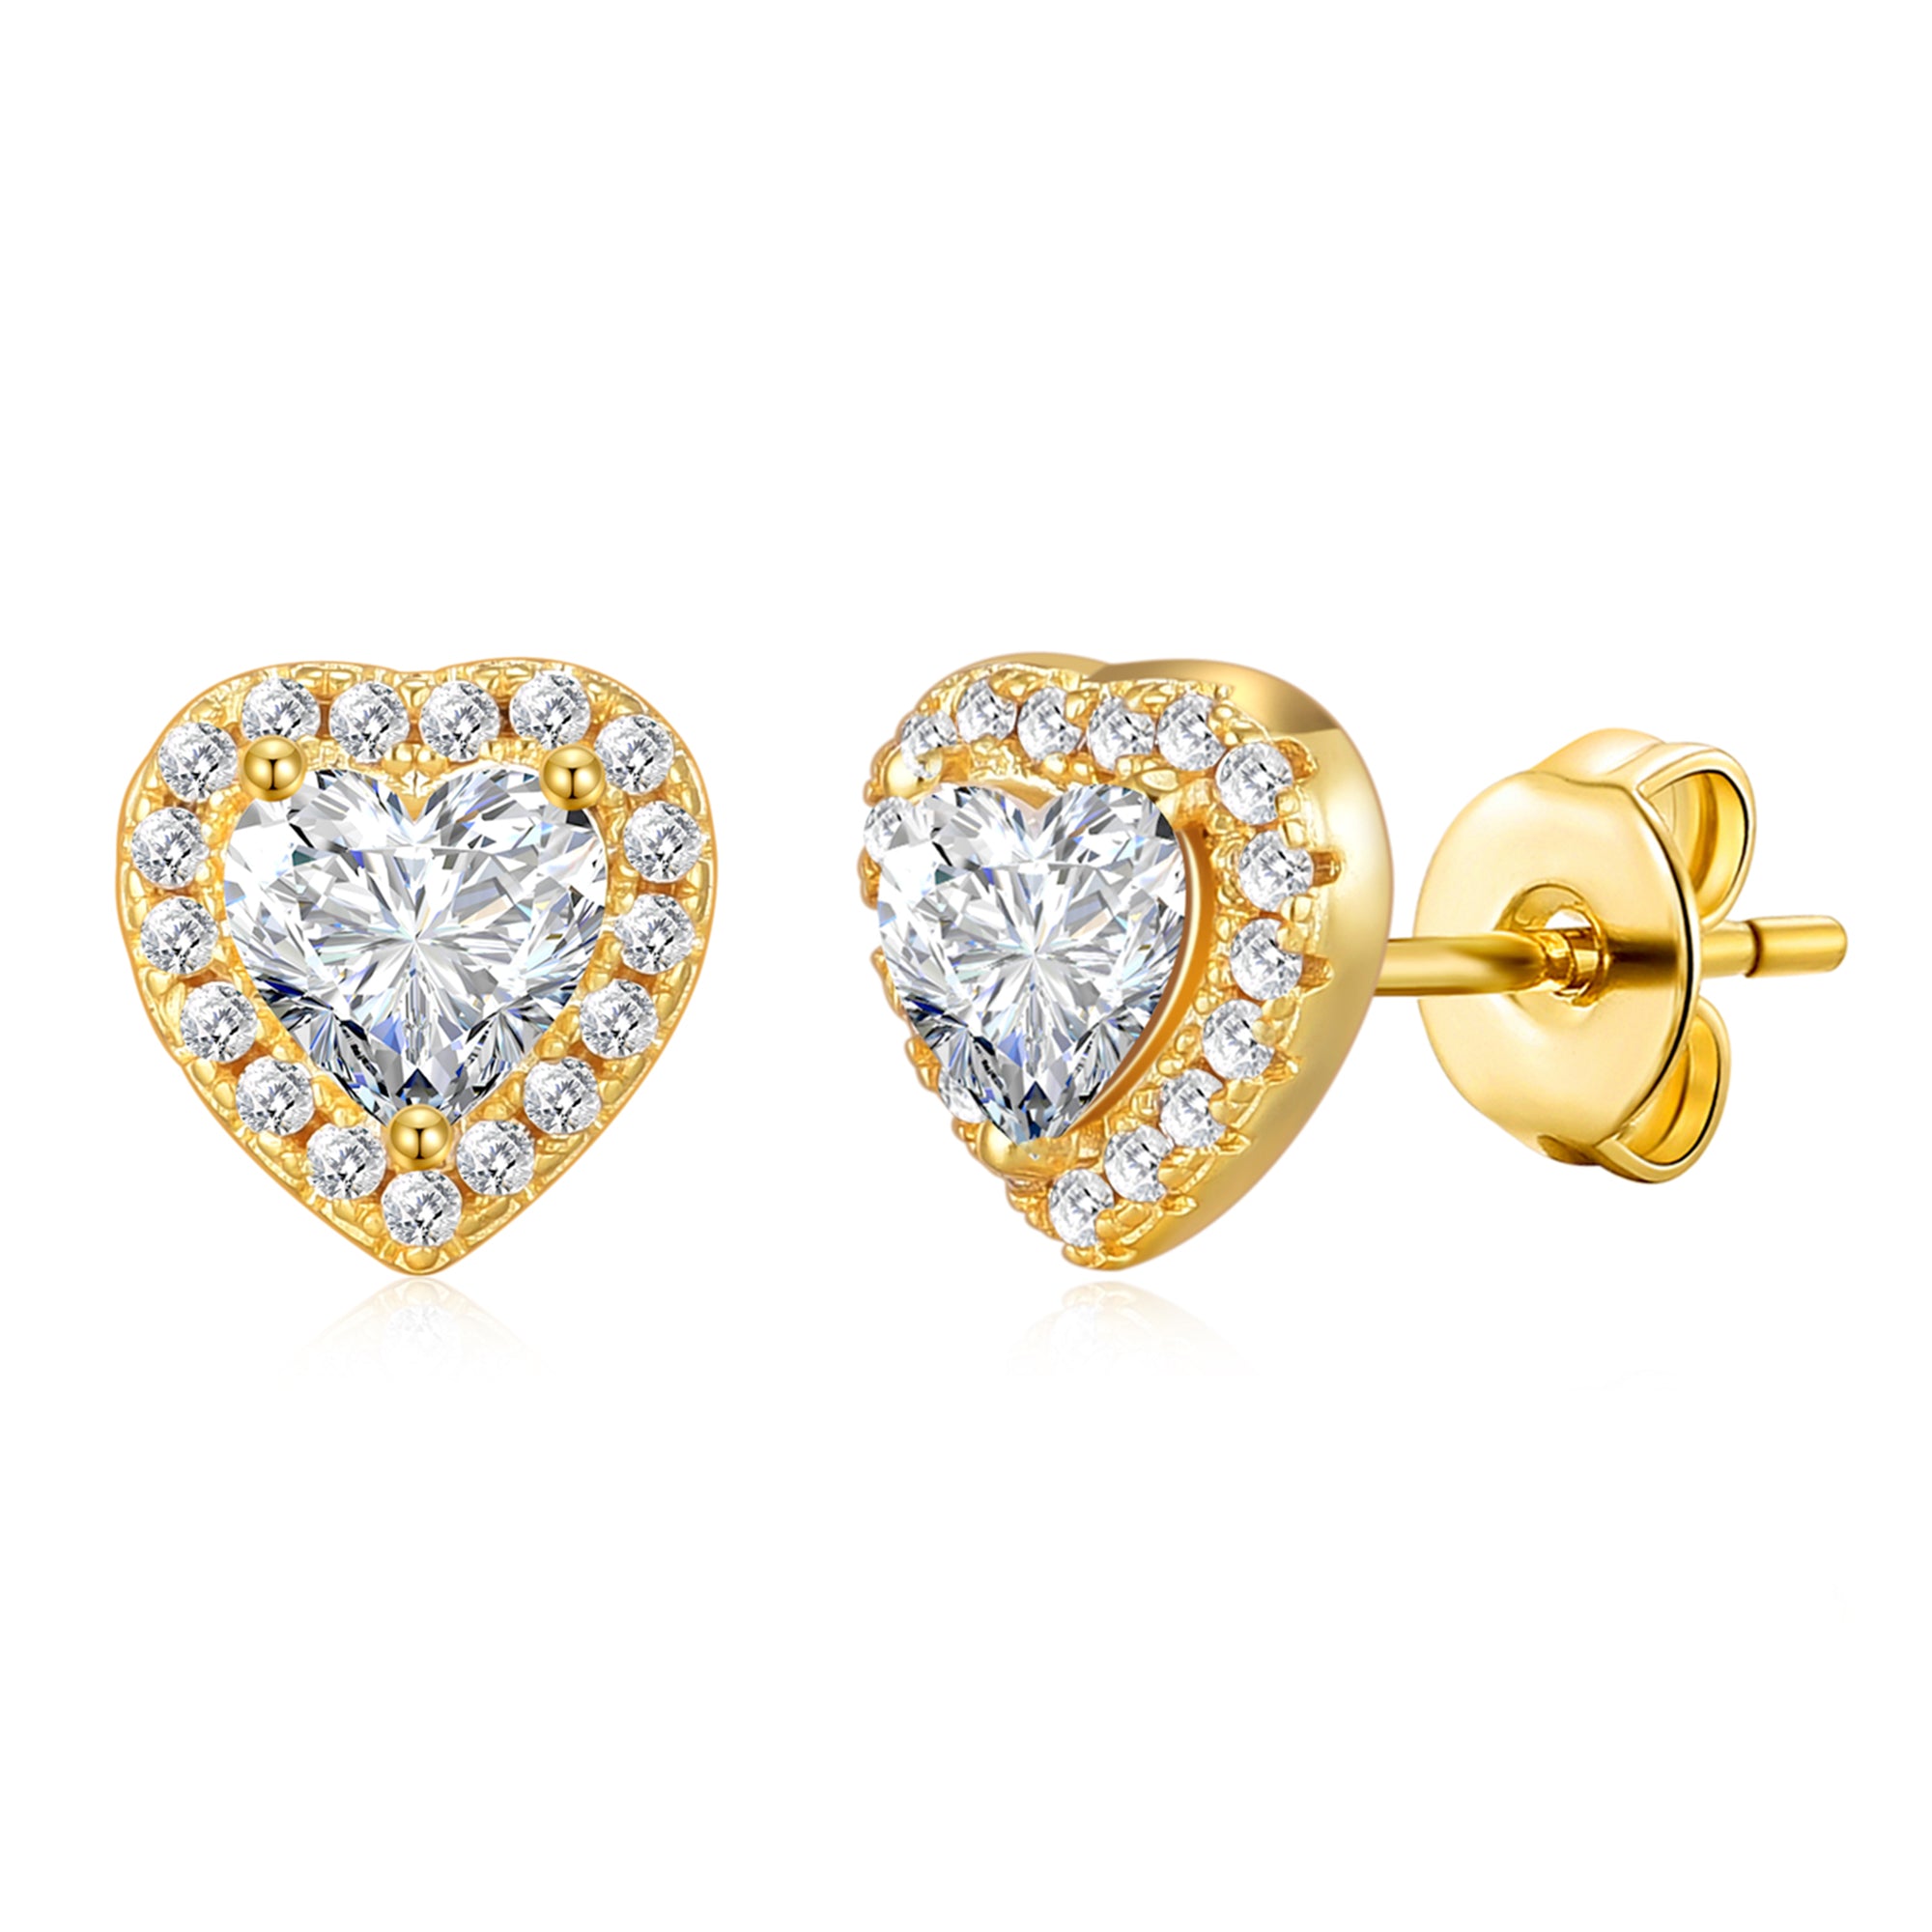 Gold Plated Heart Halo Earrings Created with Zircondia® Crystals by Philip Jones Jewellery